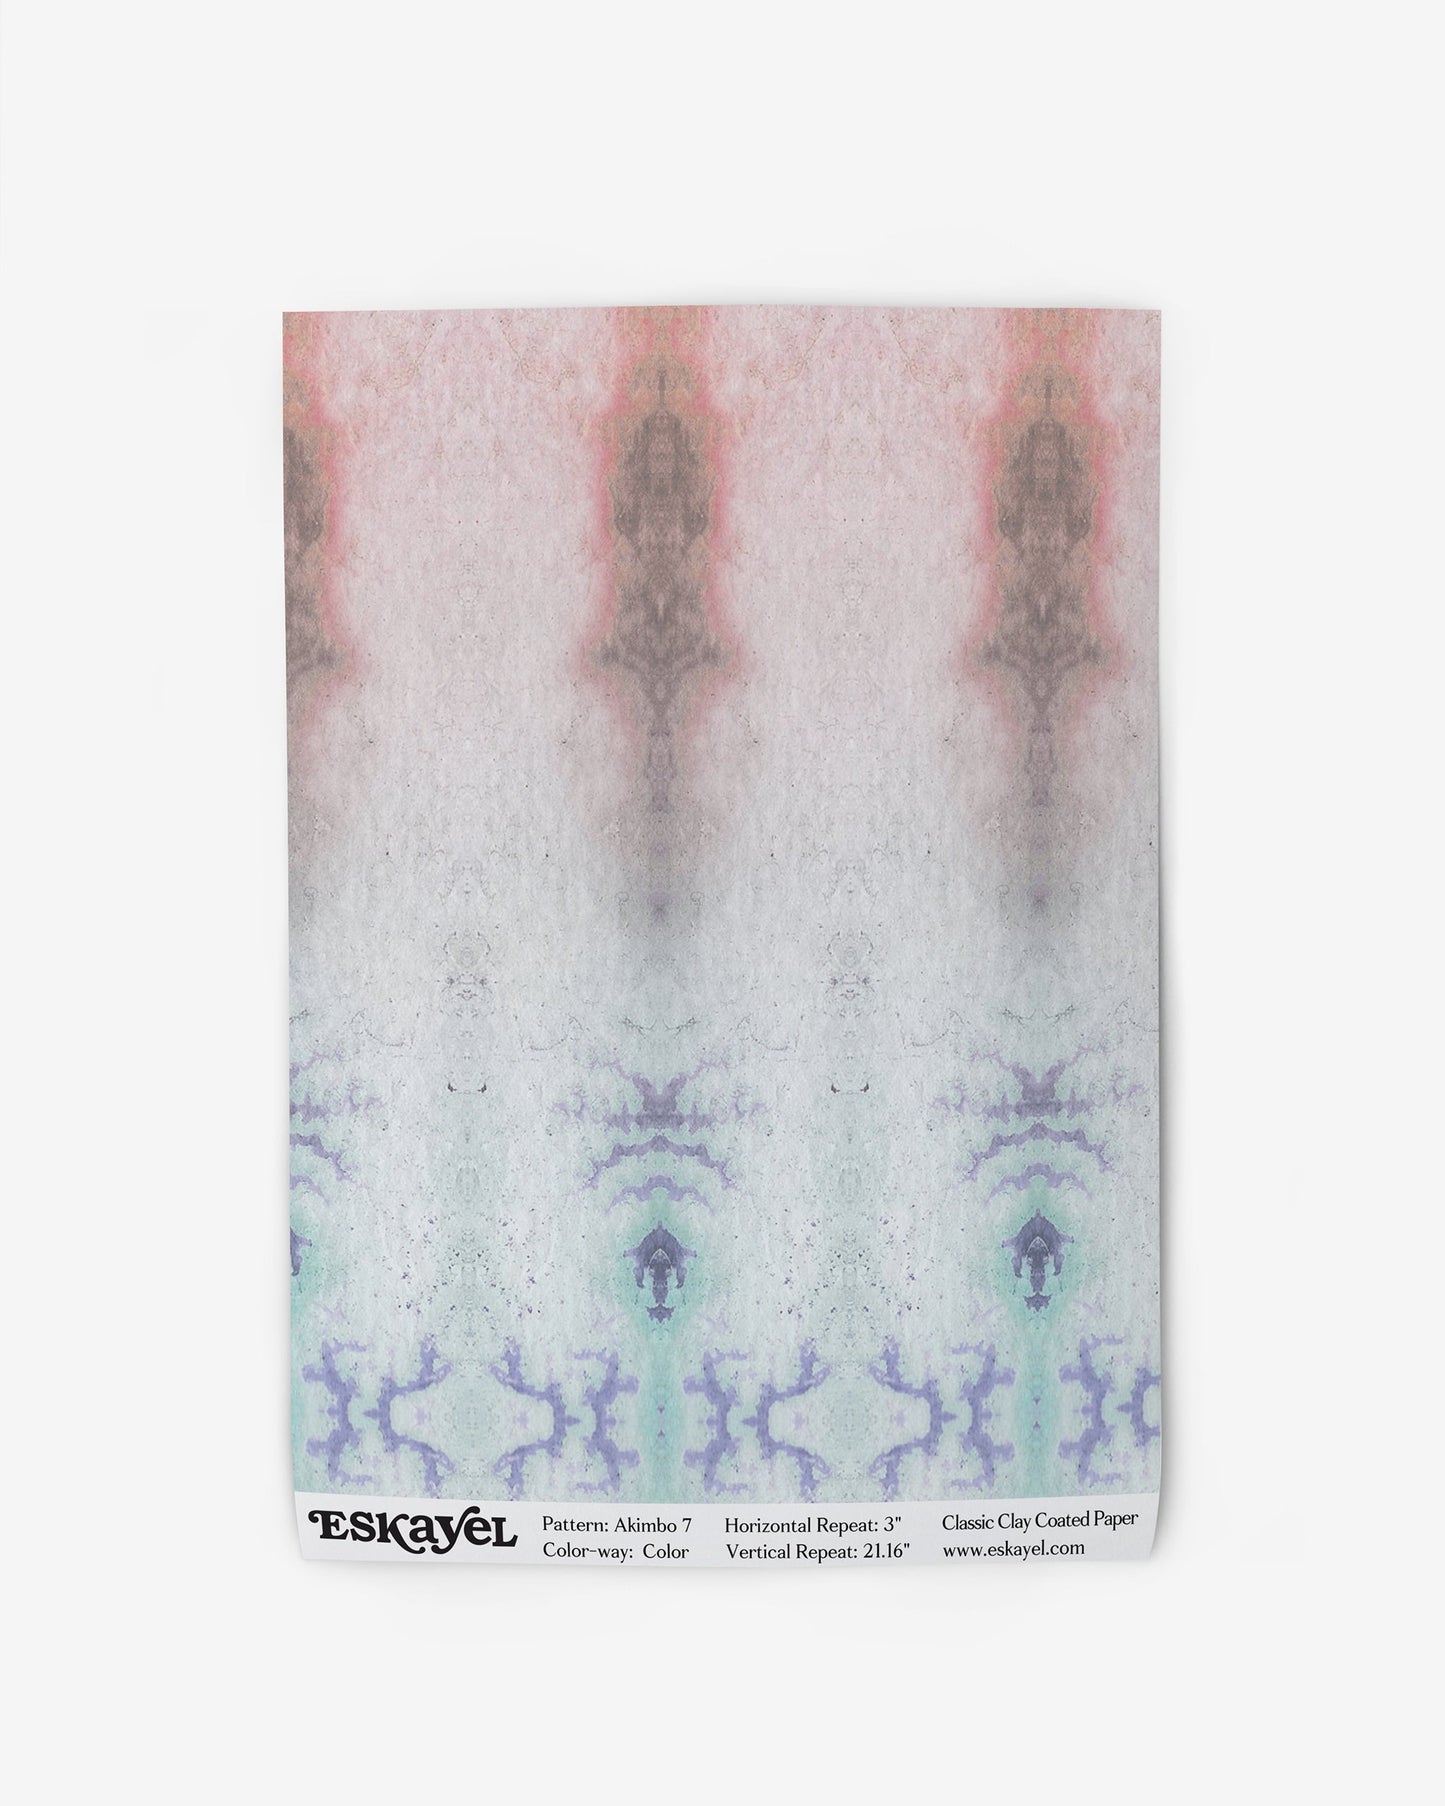 Order an Akimbo 7 Wallpaper Sample||Color with an abstract pattern for a sample.